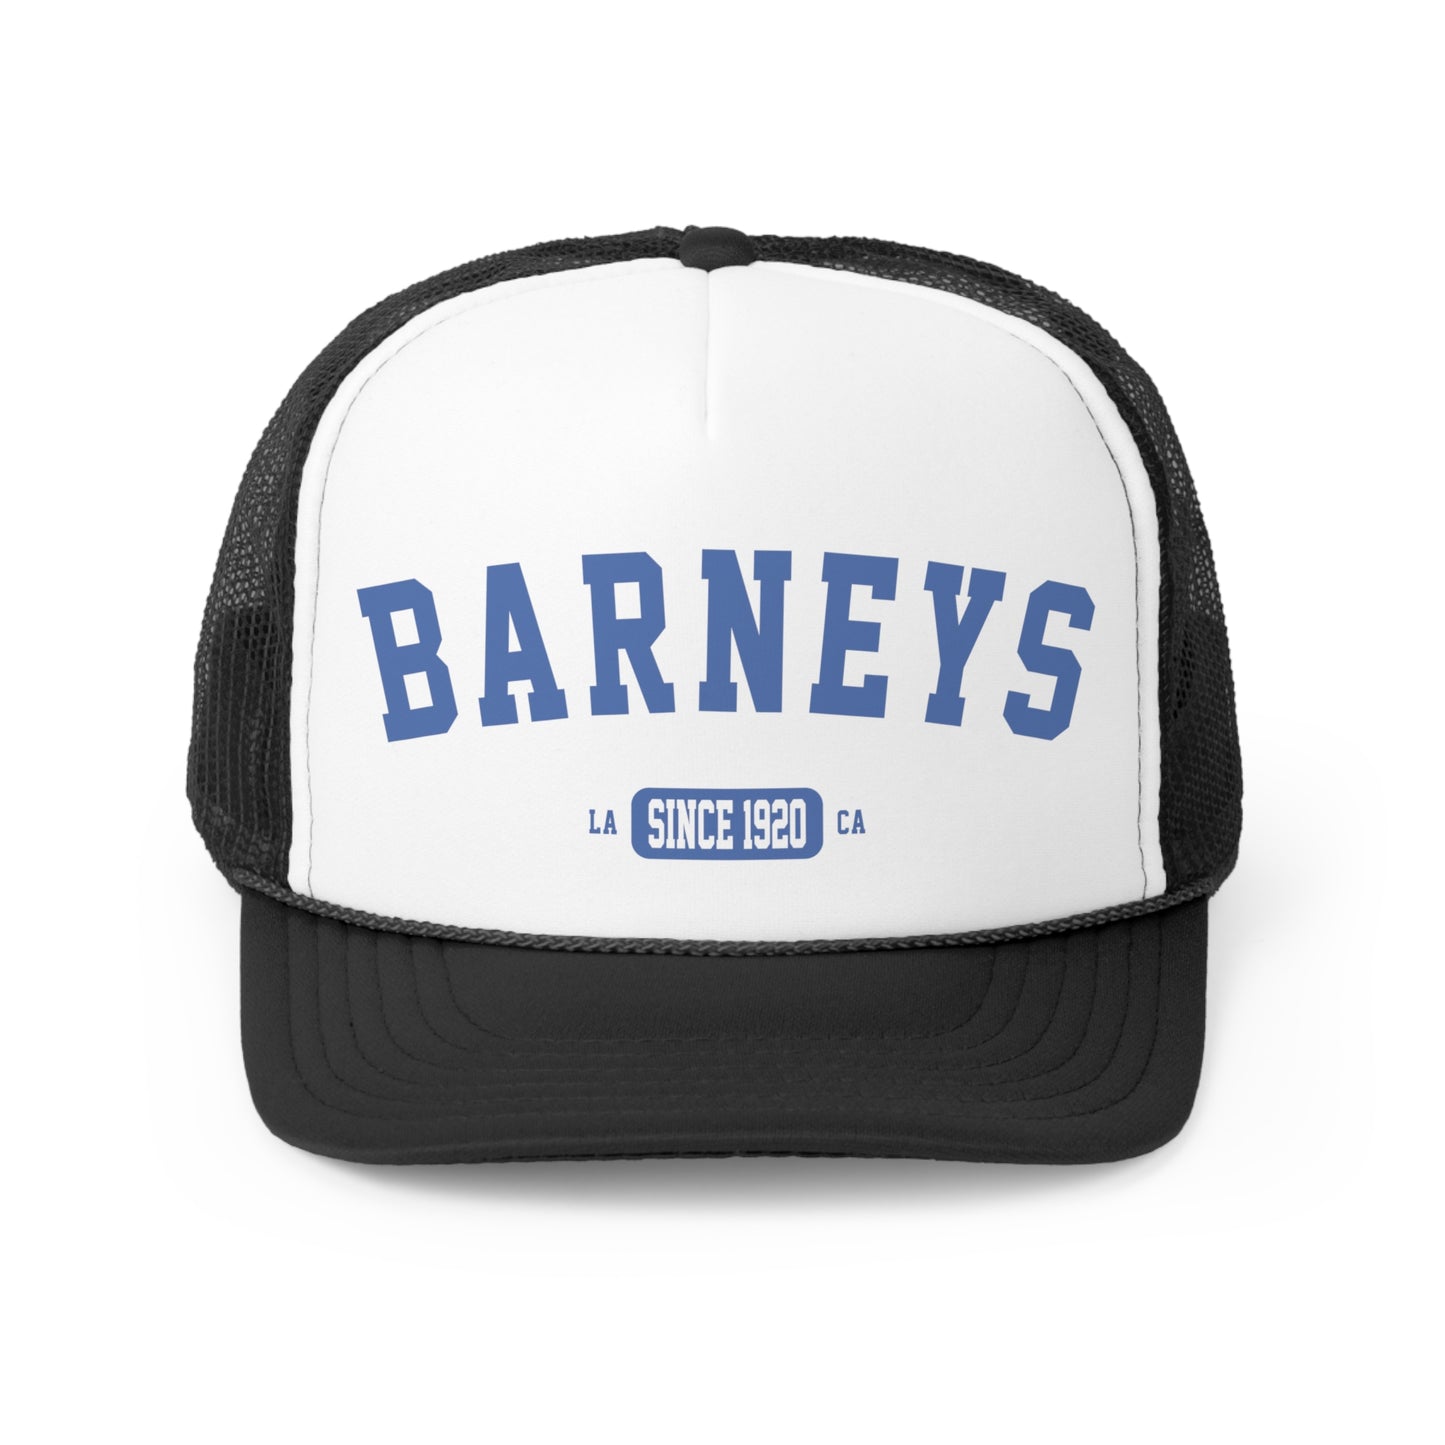 Vintage Collegiate | BARNEY'S BEANERY - Trucker Hat | Blue Graphic On Black And White Trucker Hat, Front View